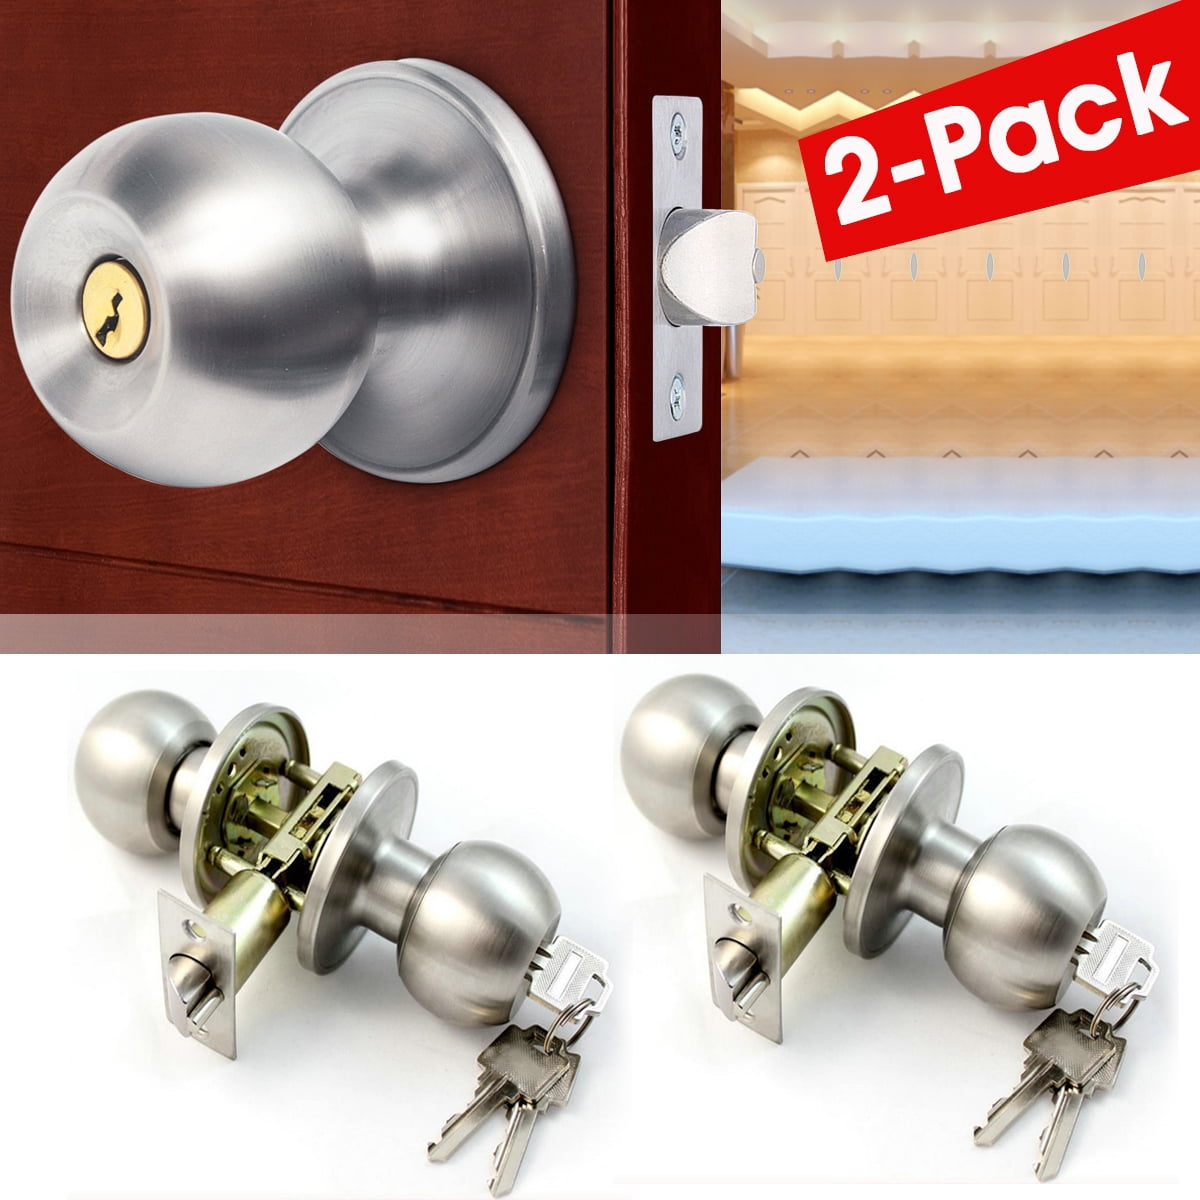 Round Door Knobs Handle Entrance Passage Lock W/ Key Set SILVER Stainless Steel 